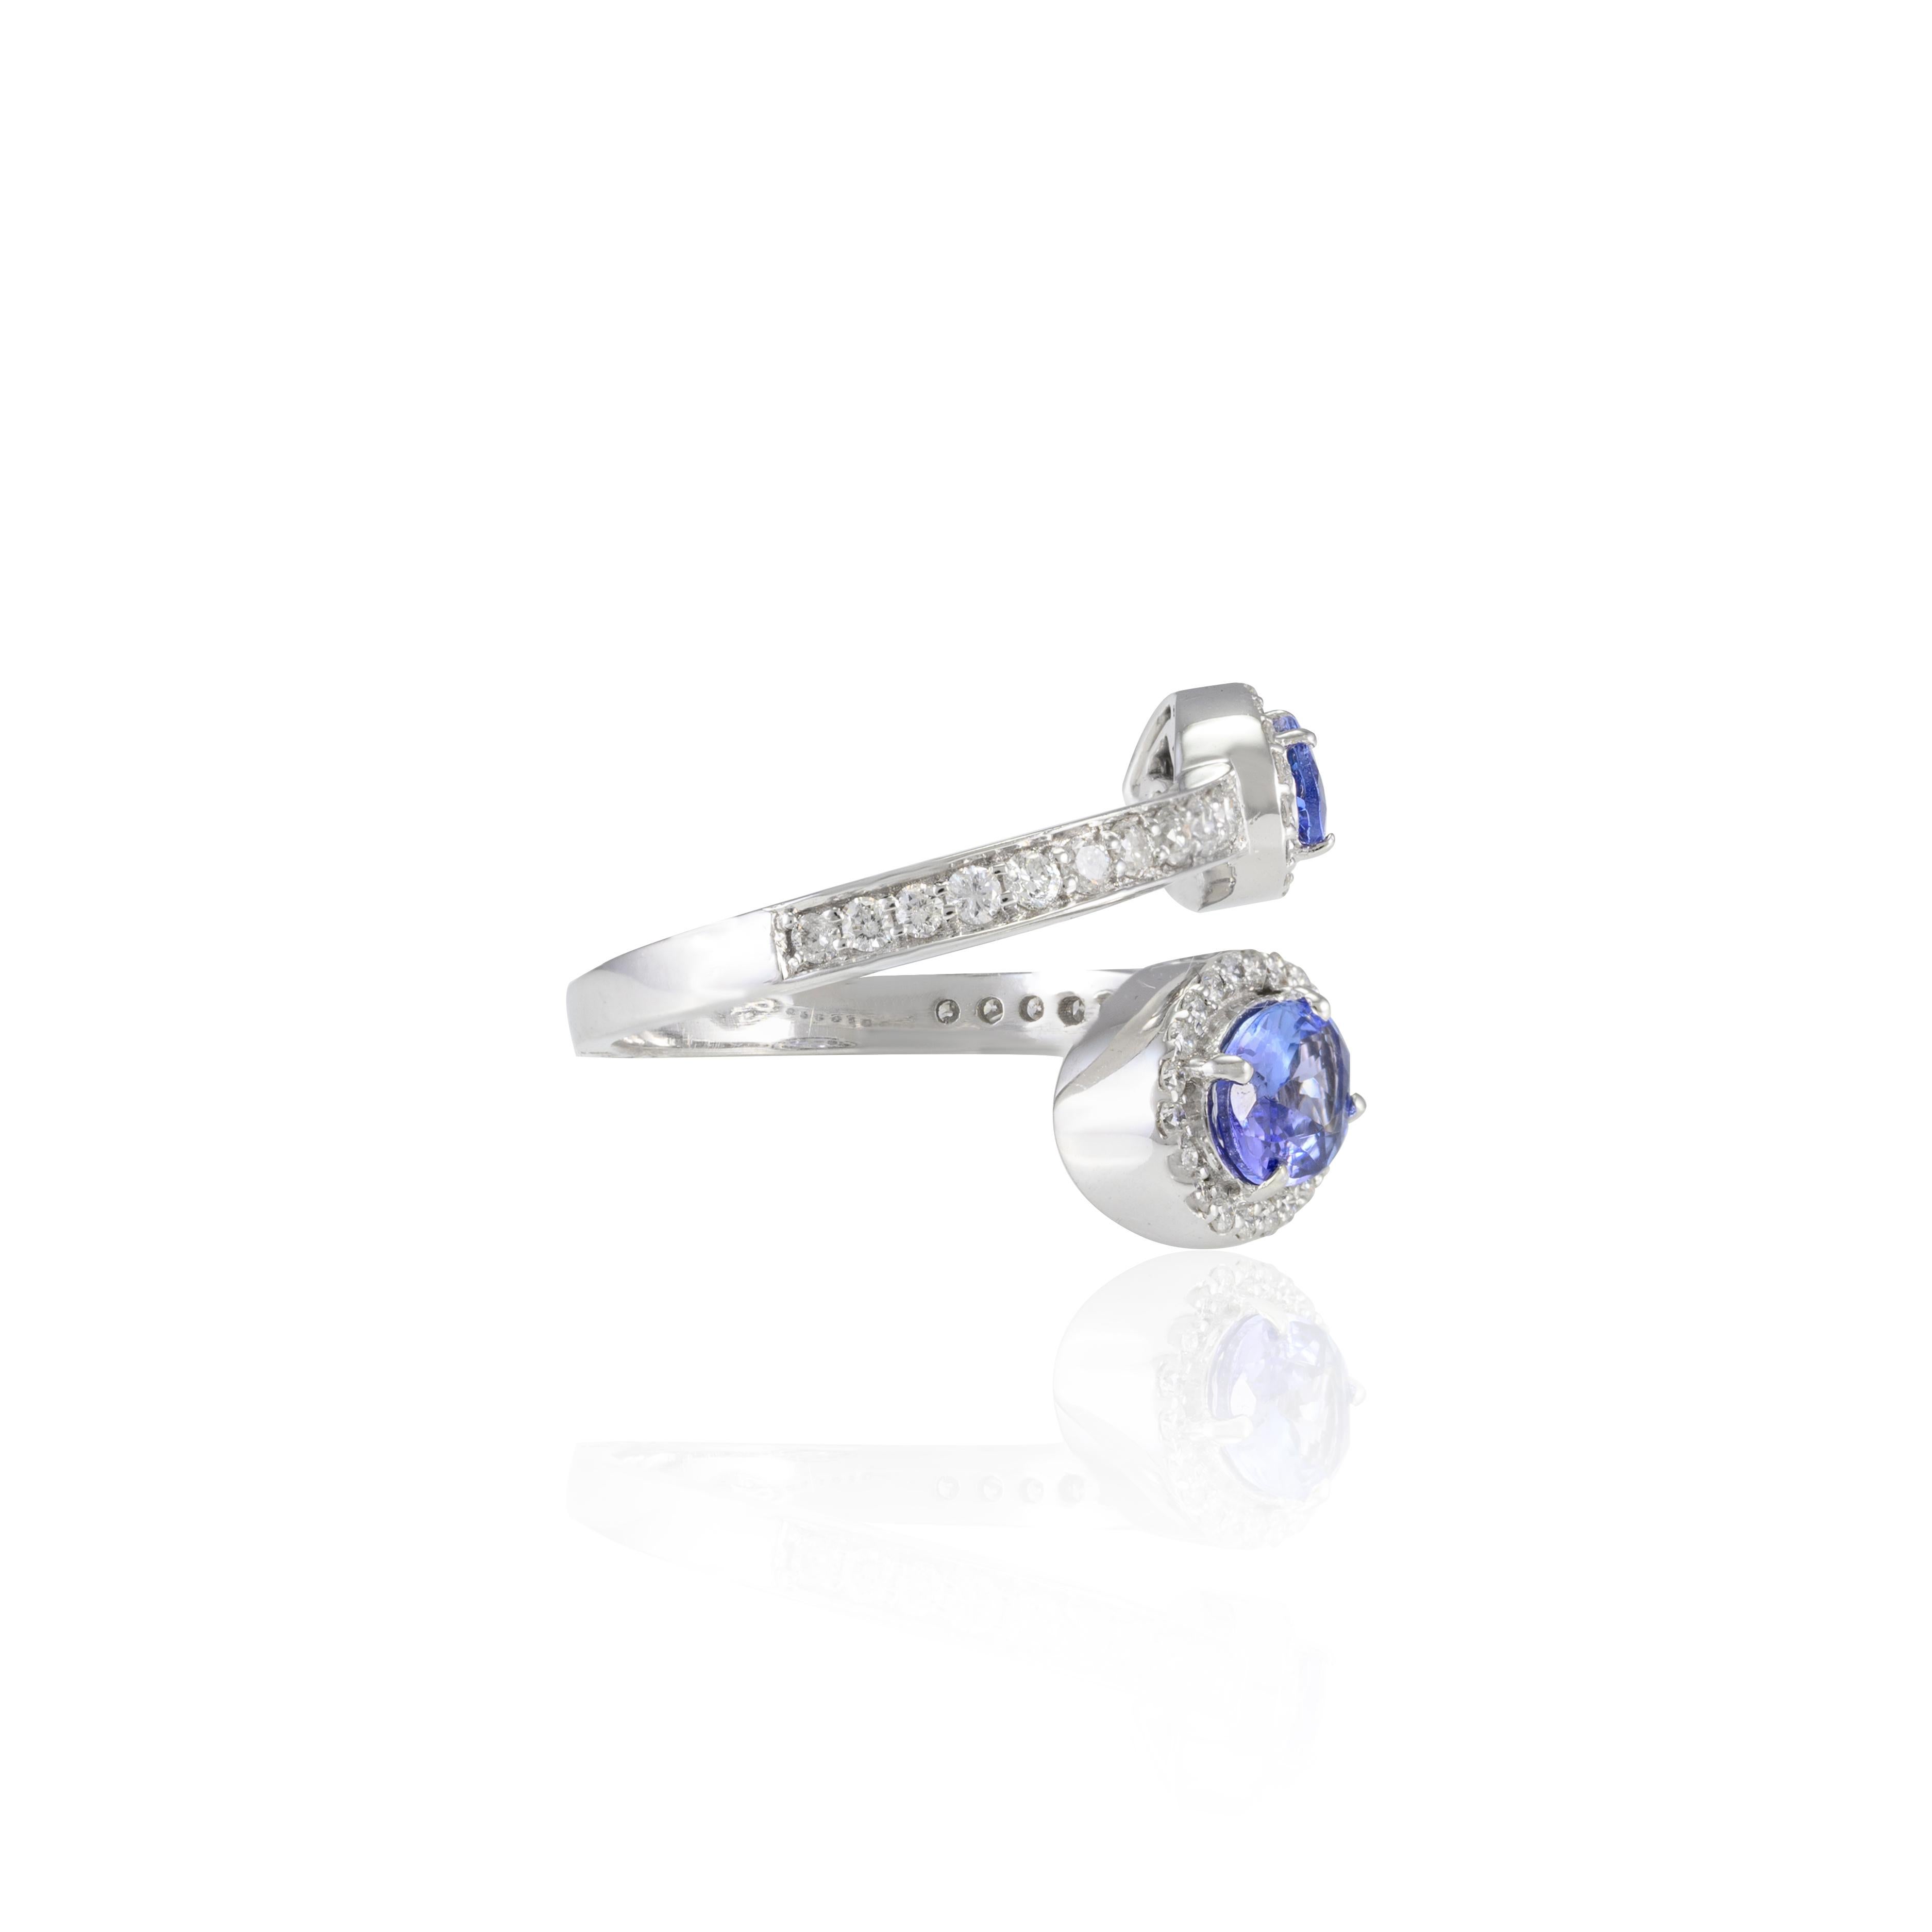 For Sale:  14k White Gold 1.04ct Genuine Oval Tanzanite and Halo Diamond Bypass Ring 3